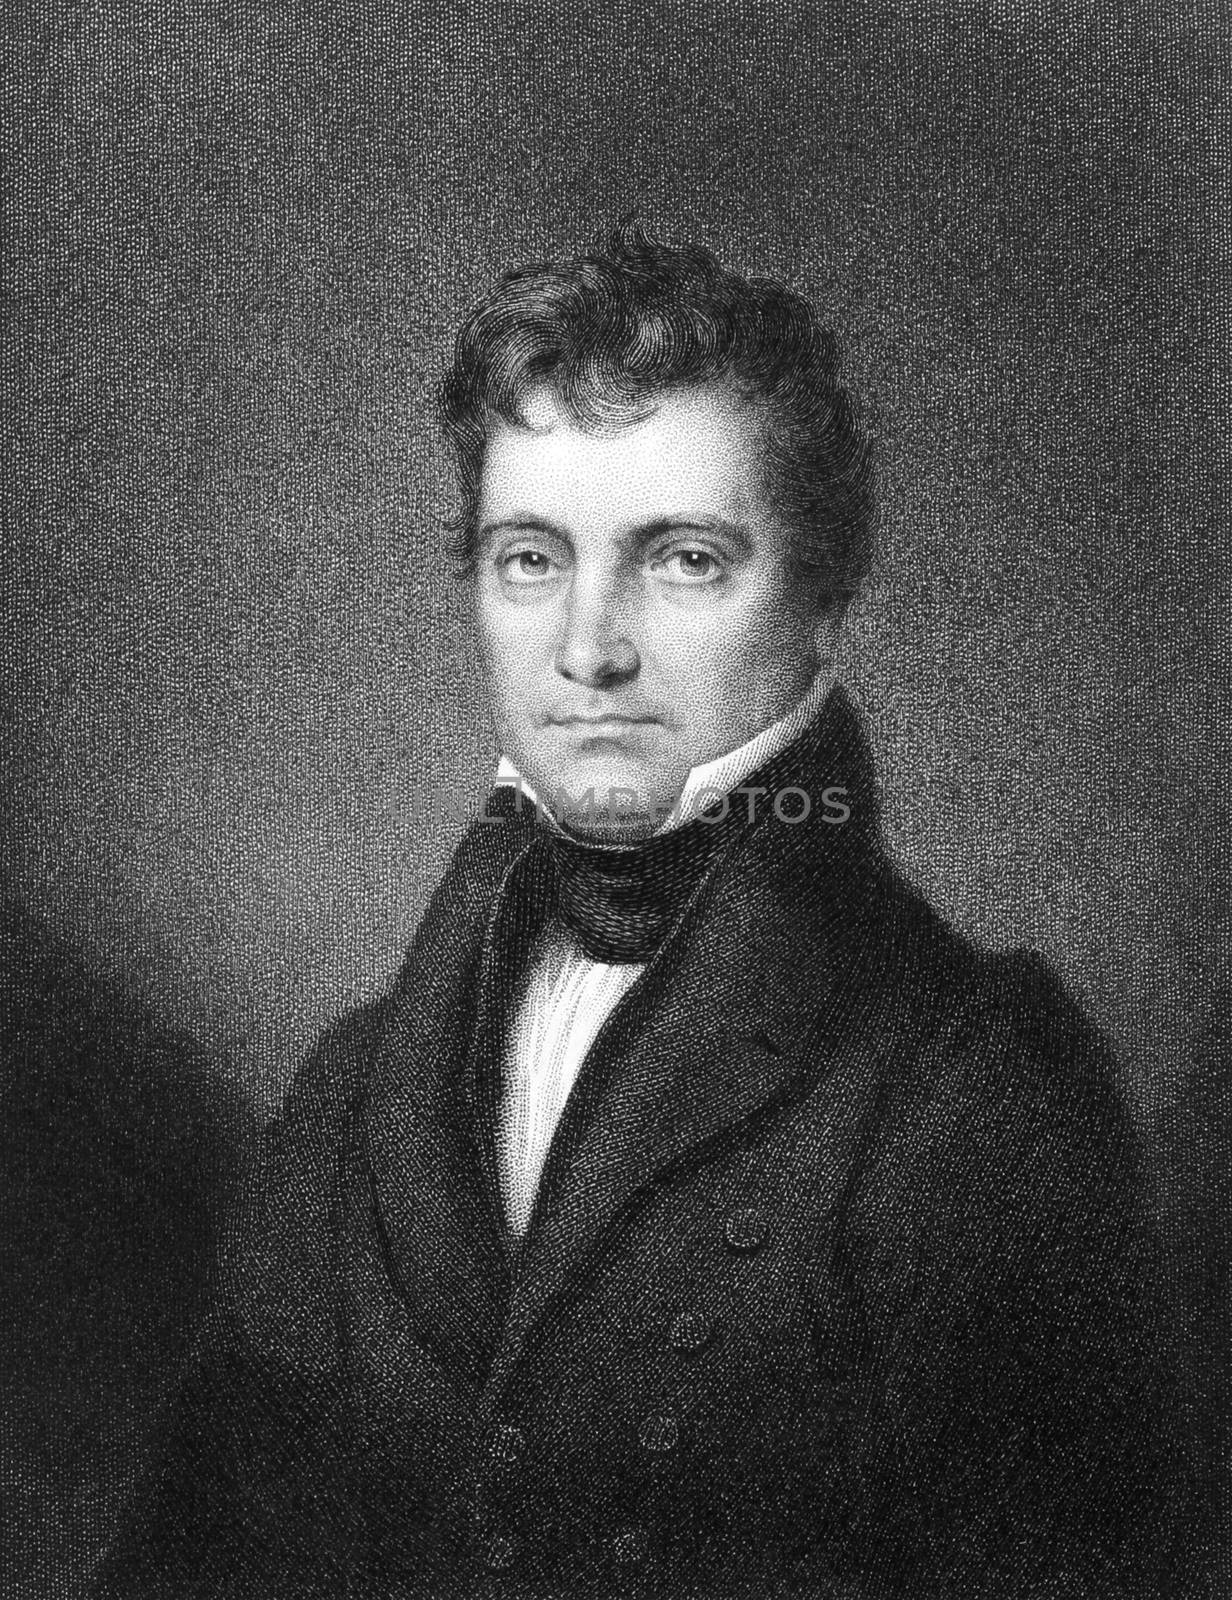 Josiah Stoddard Johnston (1784-1833) on engraving from 1834. United States Representative and Senator from Louisiana. Engraved by J.B Longacre and published in ''National Portrait Gallery of Distinguished Americans'',USA,1834.